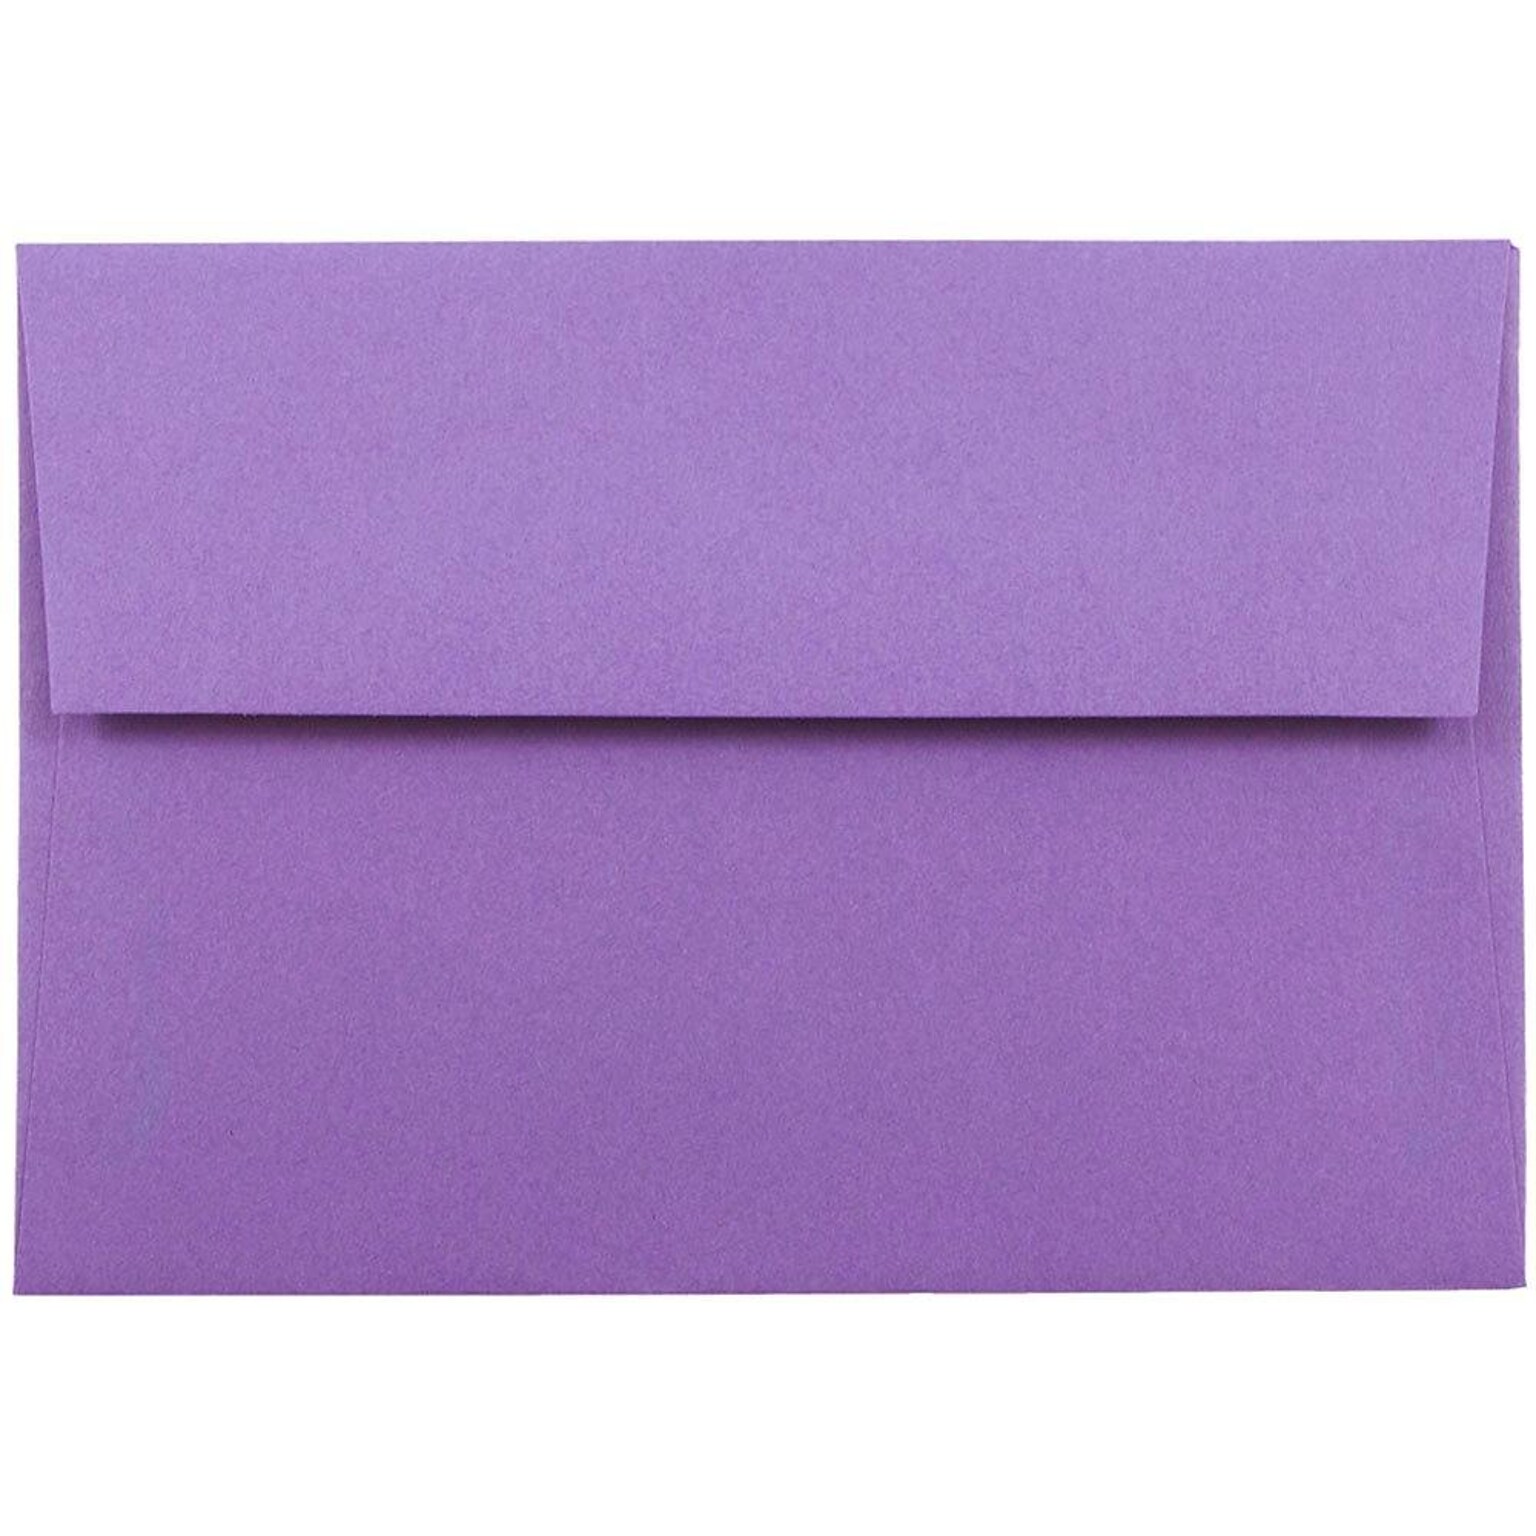 JAM Paper® 4Bar A1 Colored Invitation Envelopes, 3.625 x 5.125, Violet Purple Recycled, 50/Pack (15815I)